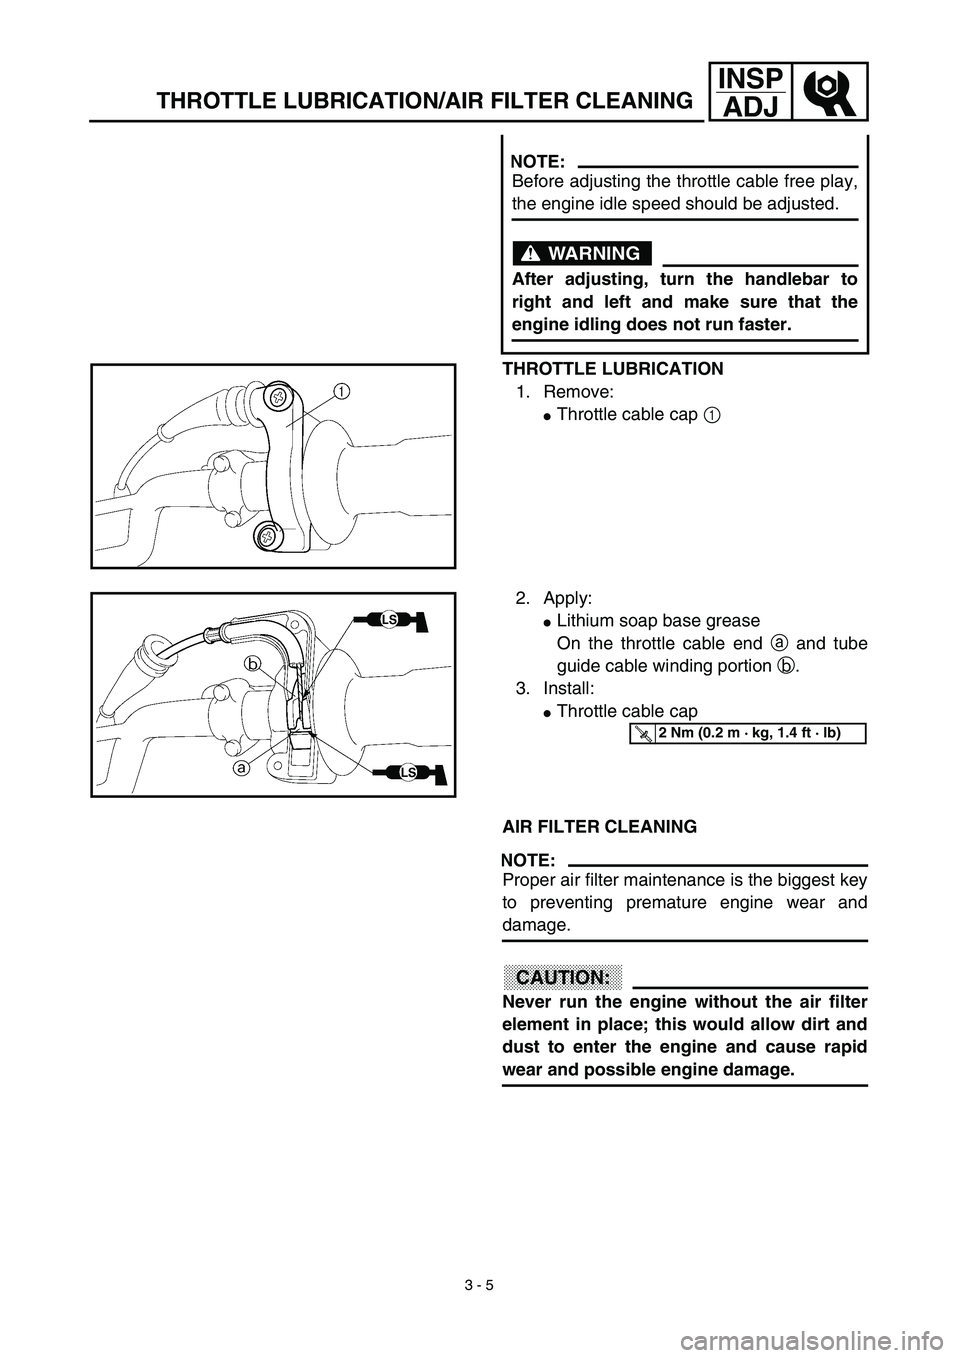 YAMAHA TTR125 2003  Notices Demploi (in French) 3 - 5
INSP
ADJ
THROTTLE LUBRICATION/AIR FILTER CLEANING
THROTTLE LUBRICATION
1. Remove:
Throttle cable cap 1 
NOTE:
Before adjusting the throttle cable free play,
the engine idle speed should be adju